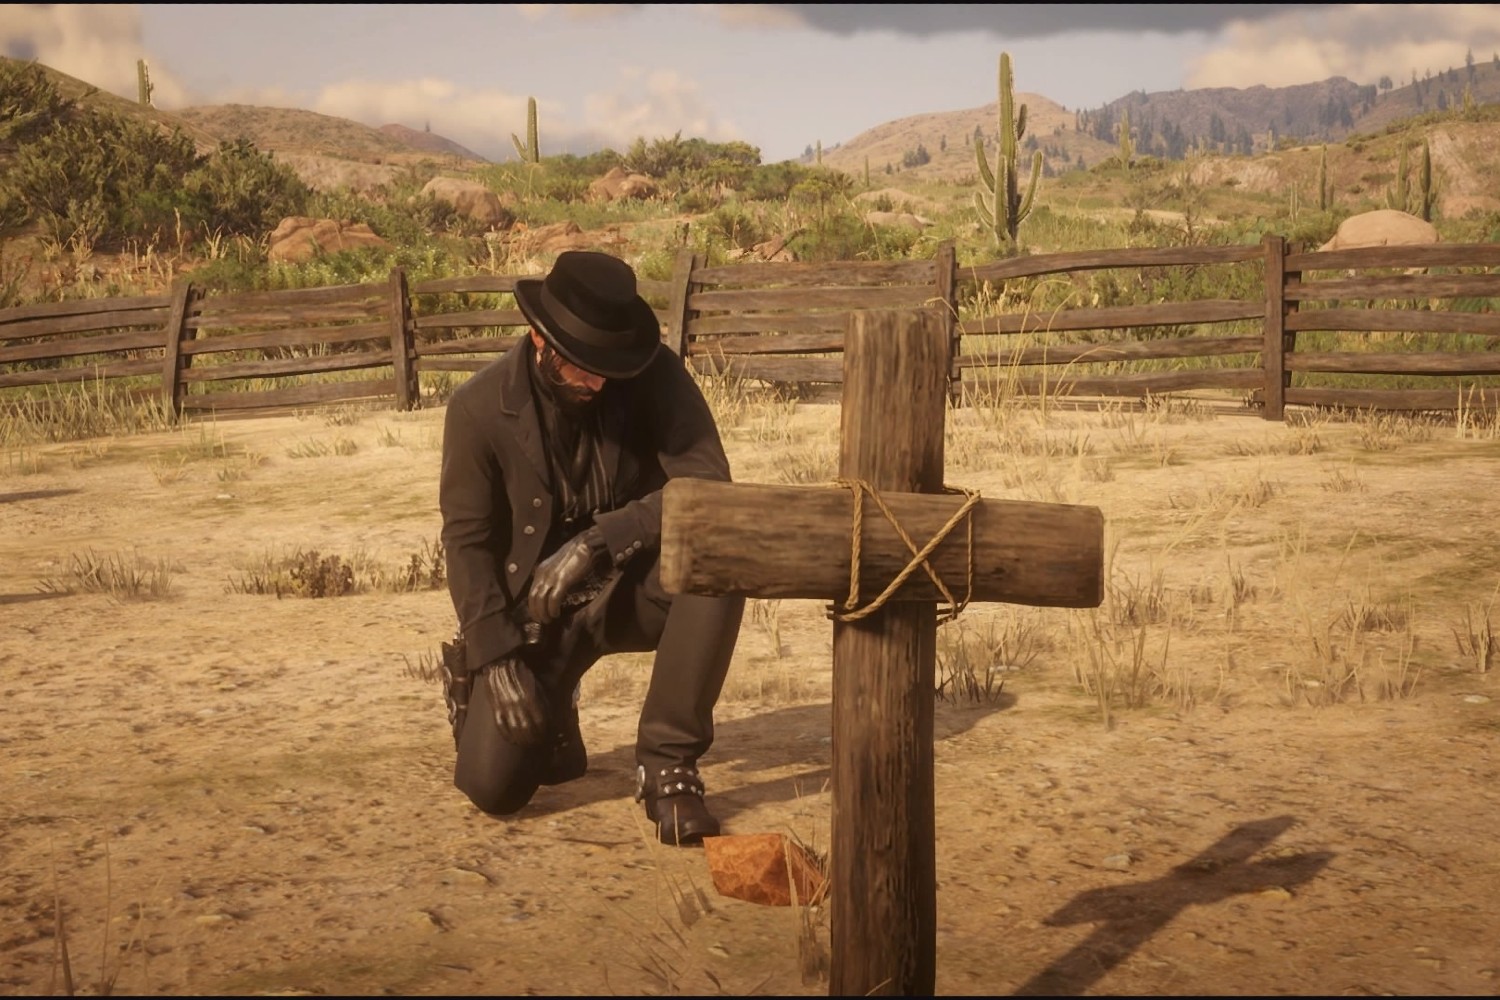 Red Dead Online Faces In-Game Funeral Amidst Lackluster Updates